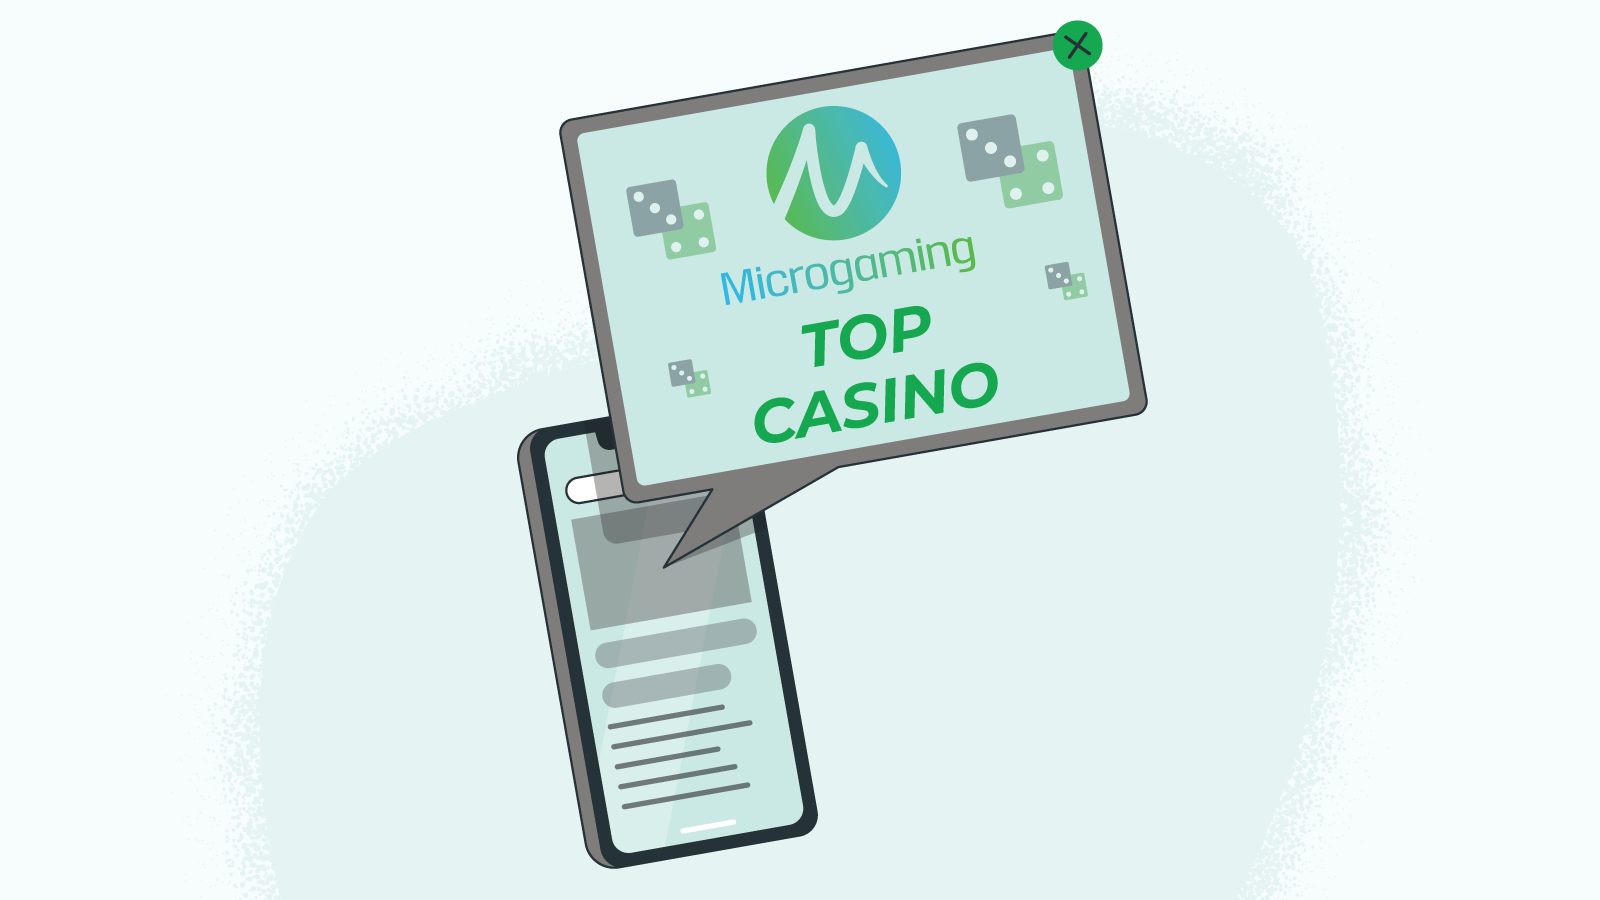 What is a top Microgaming casino